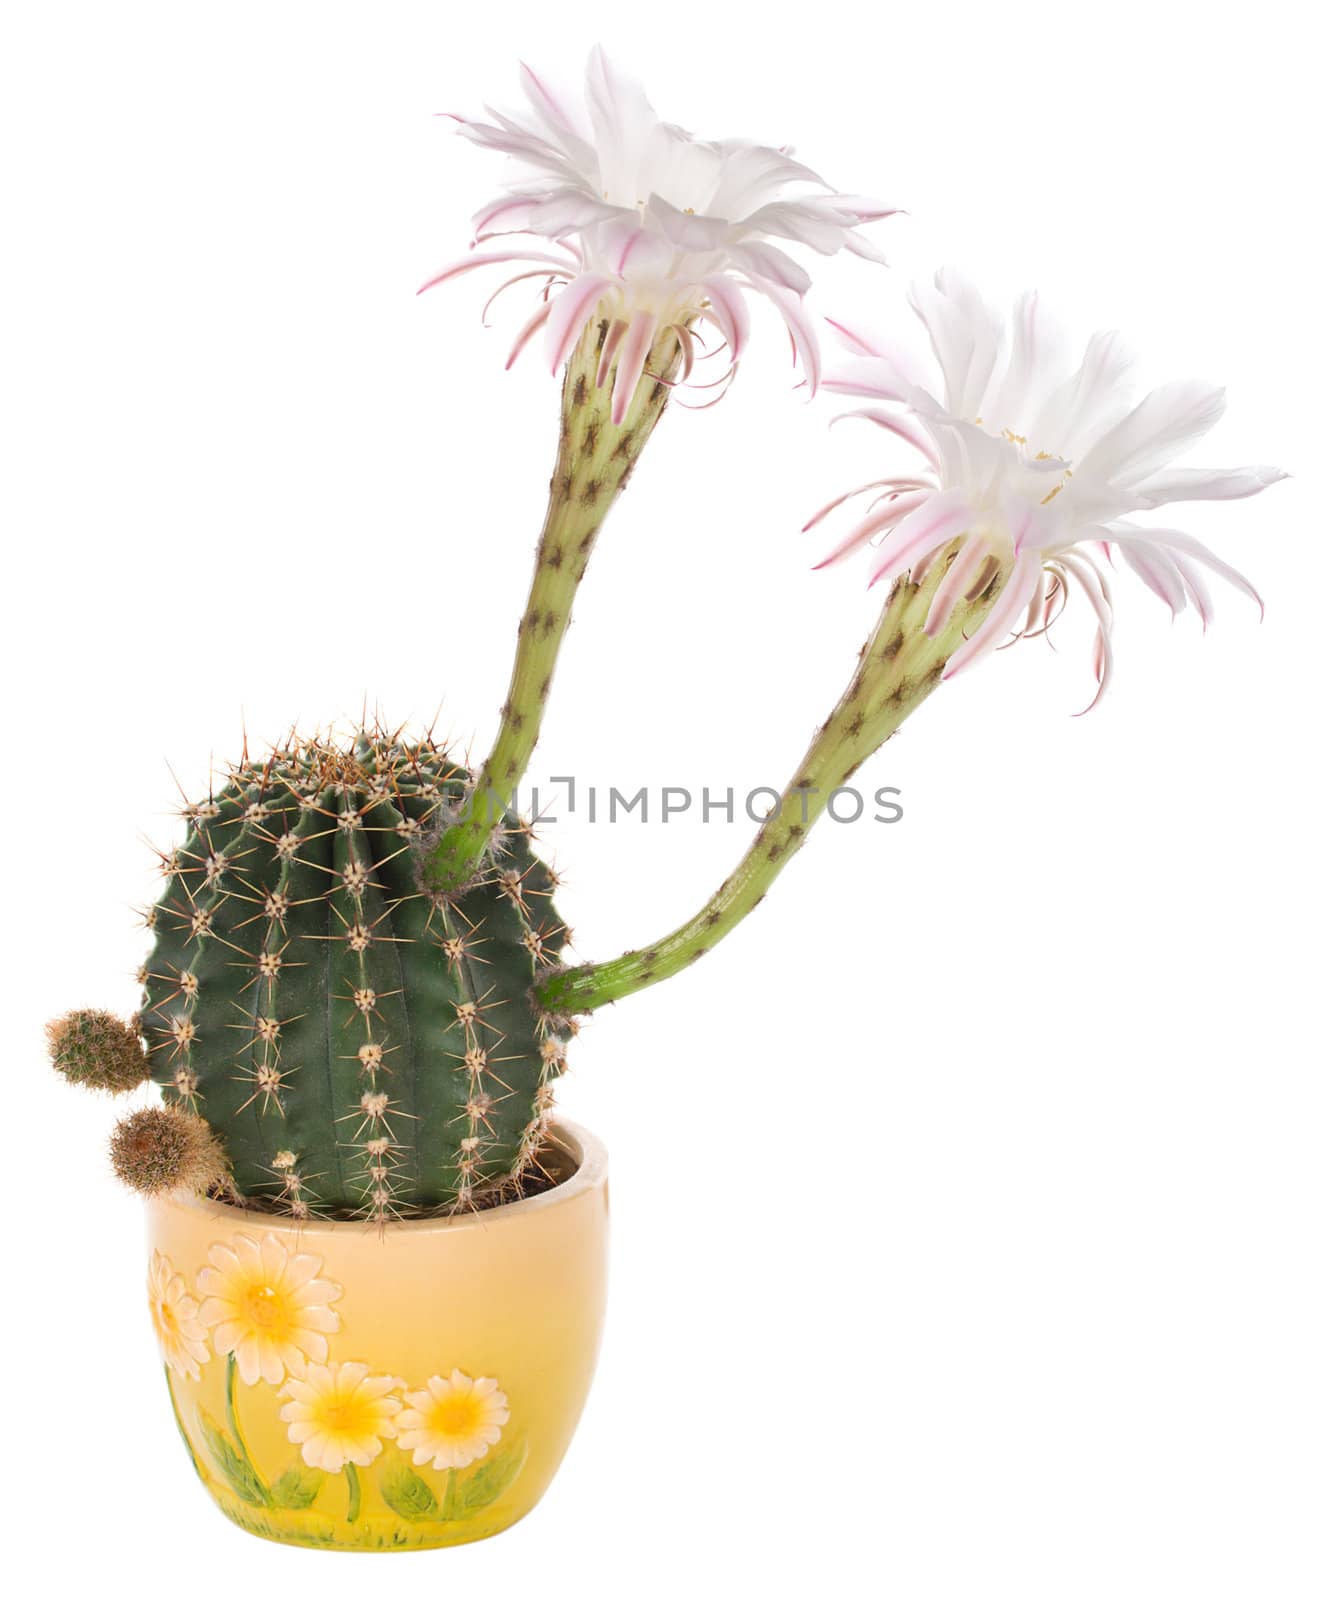 blossoming cactus with white flowers in pot, isolated on white